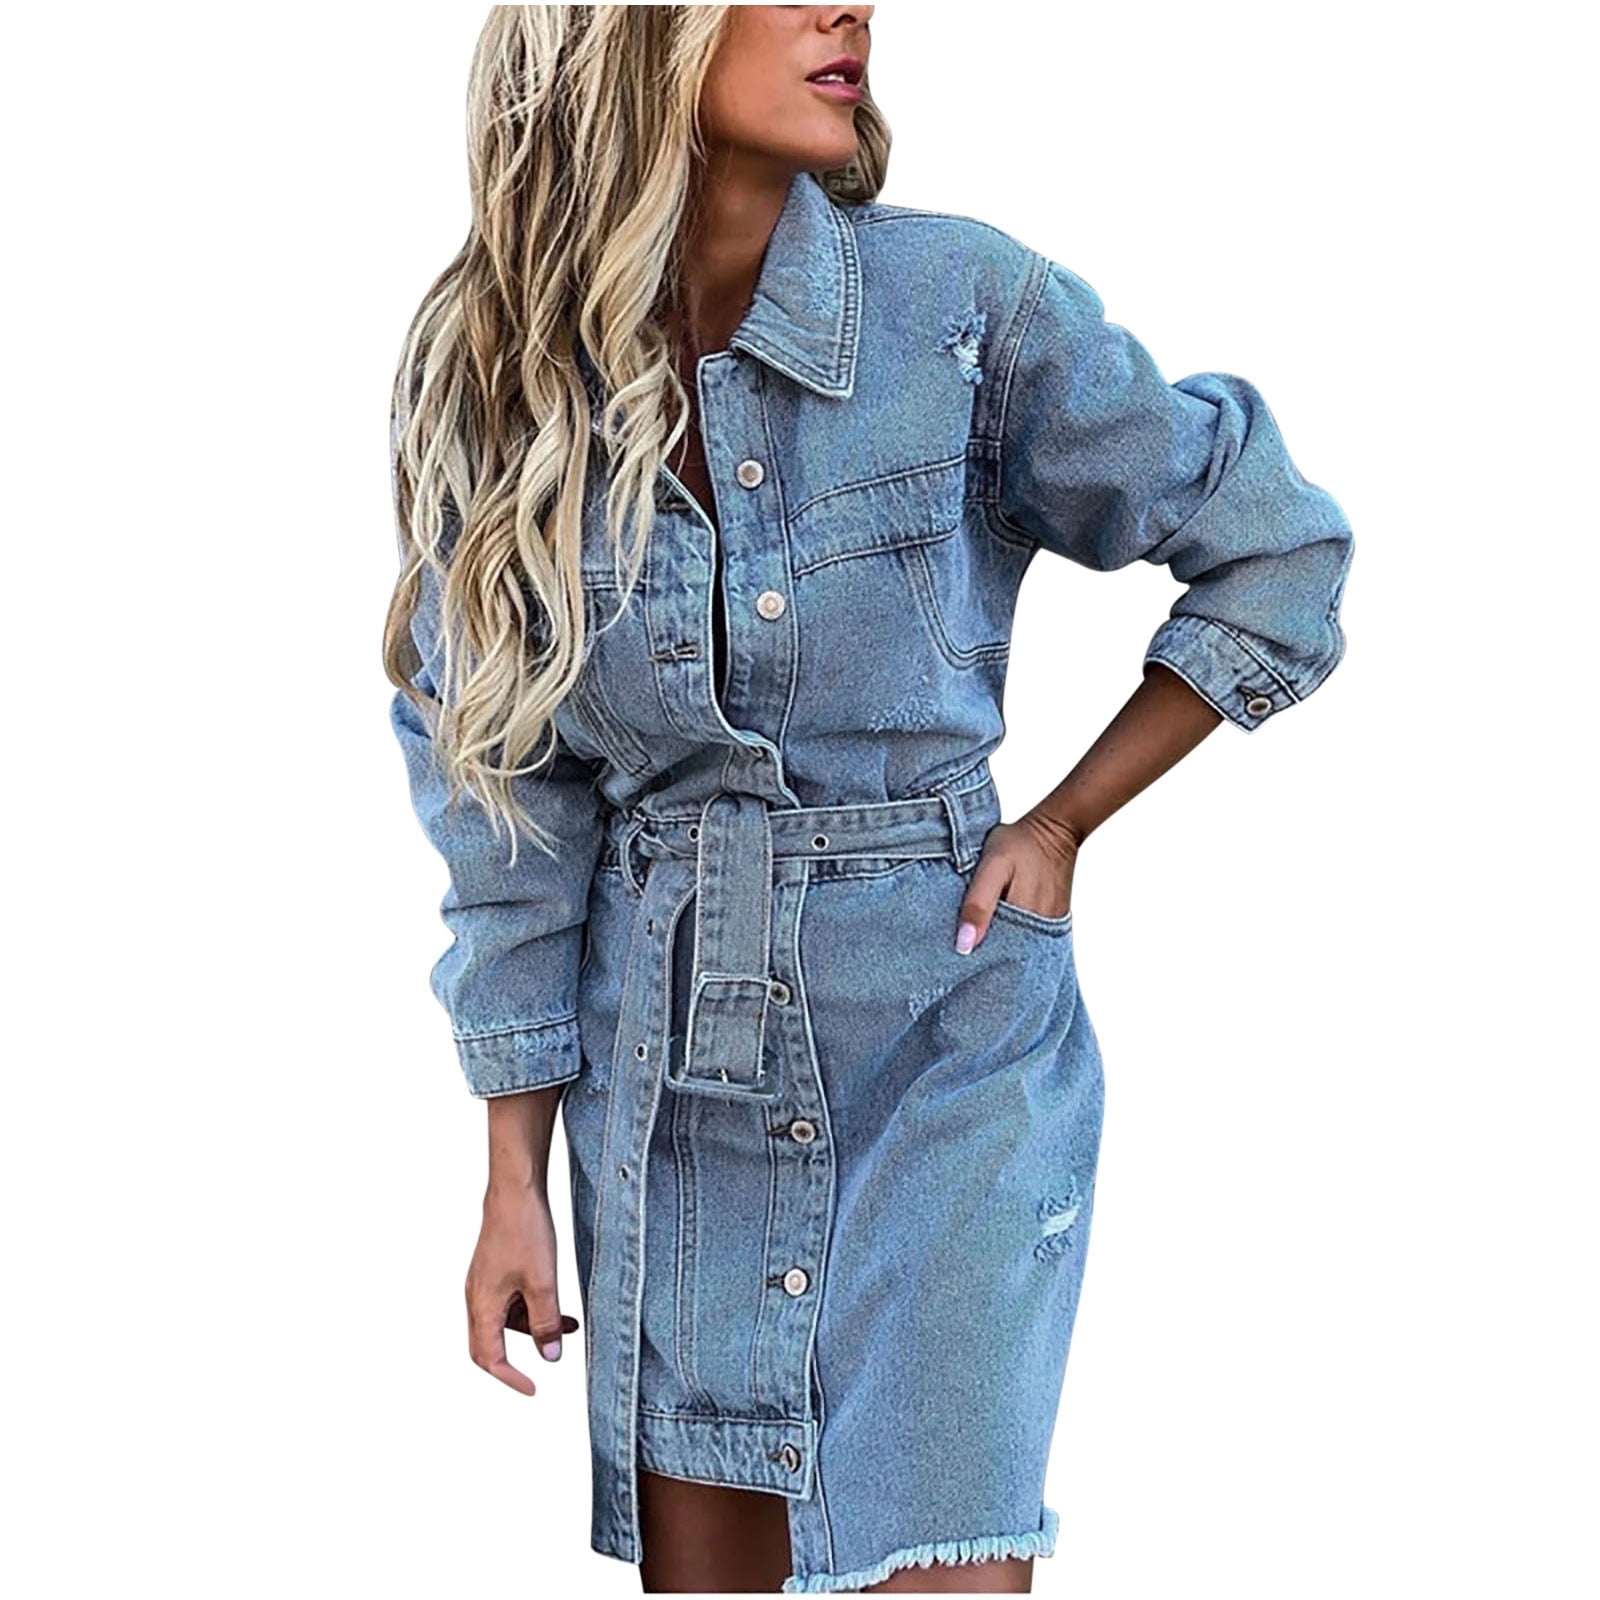 Women's Fashion Comfy Loose Dress Solid Color Shirt V Collar Casual Dress  Slit Irregular H Denim Dresses with Button at Amazon Women's Clothing store